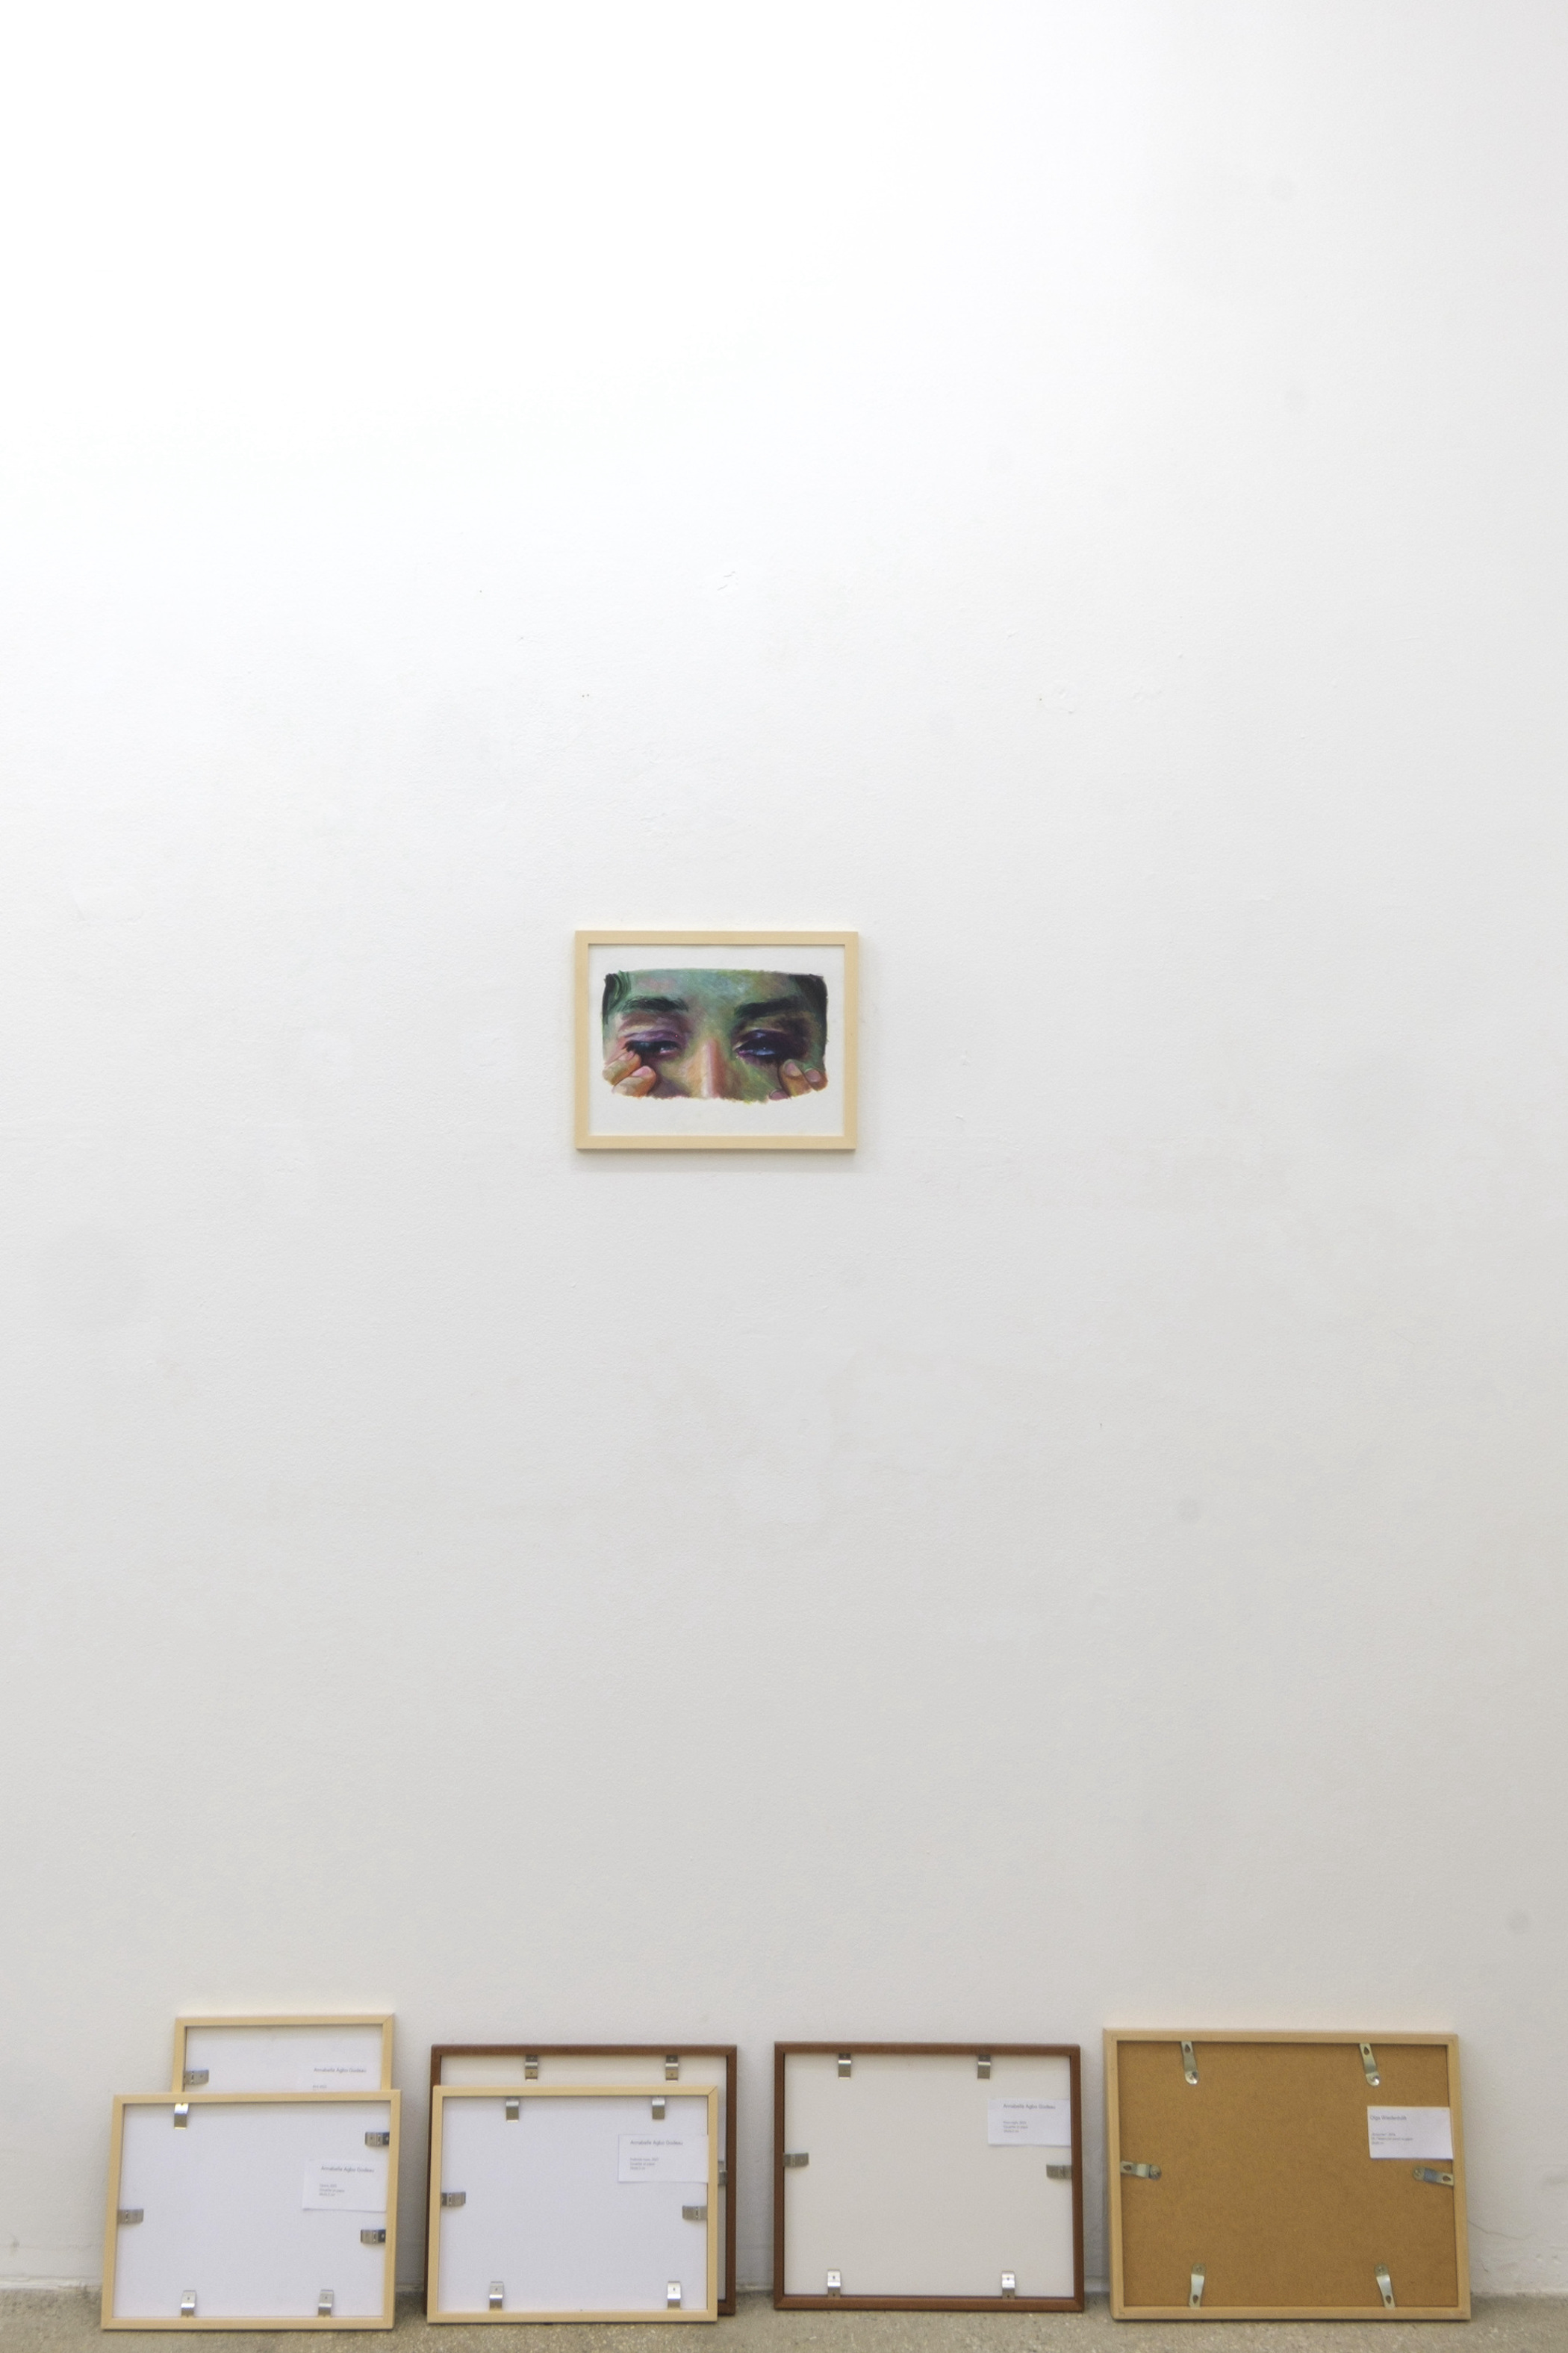 Installation view, "Self Service", with work by Annabelle Agbo Godeau "Opera," 2023, Gouache on paper, 34x26.5 cm